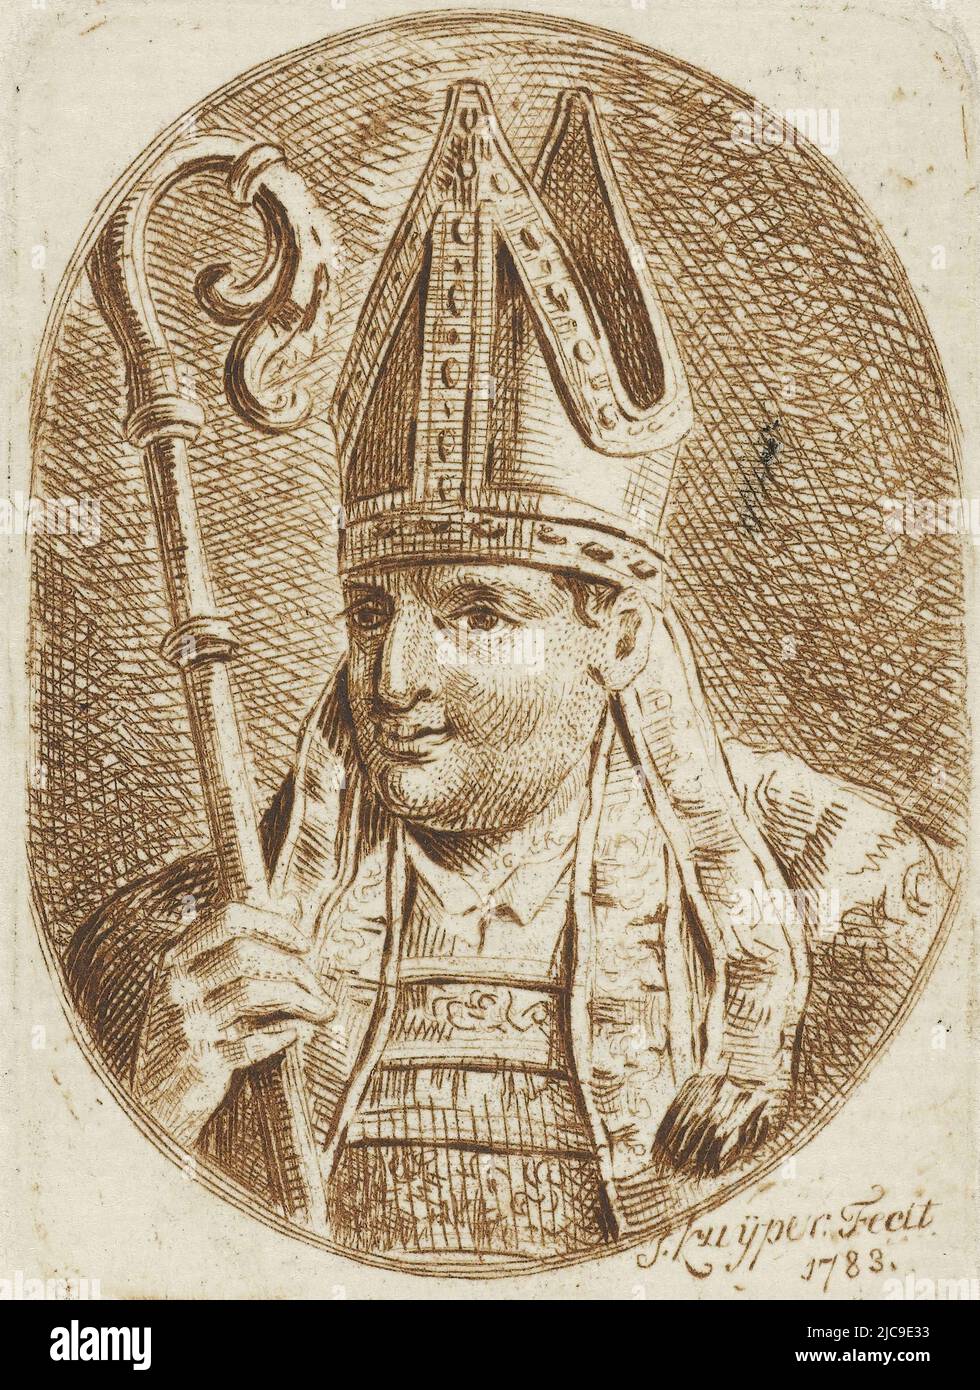 Portrait bust of St. Boniface in an oval to the left. Boniface wears a mitre on his head and holds in his right hand a bishop's staff. Portrait of St. Boniface, print maker: Jacques Kuyper, (mentioned on object), 1783, paper, etching, h 70 mm - w 51 mm Stock Photo